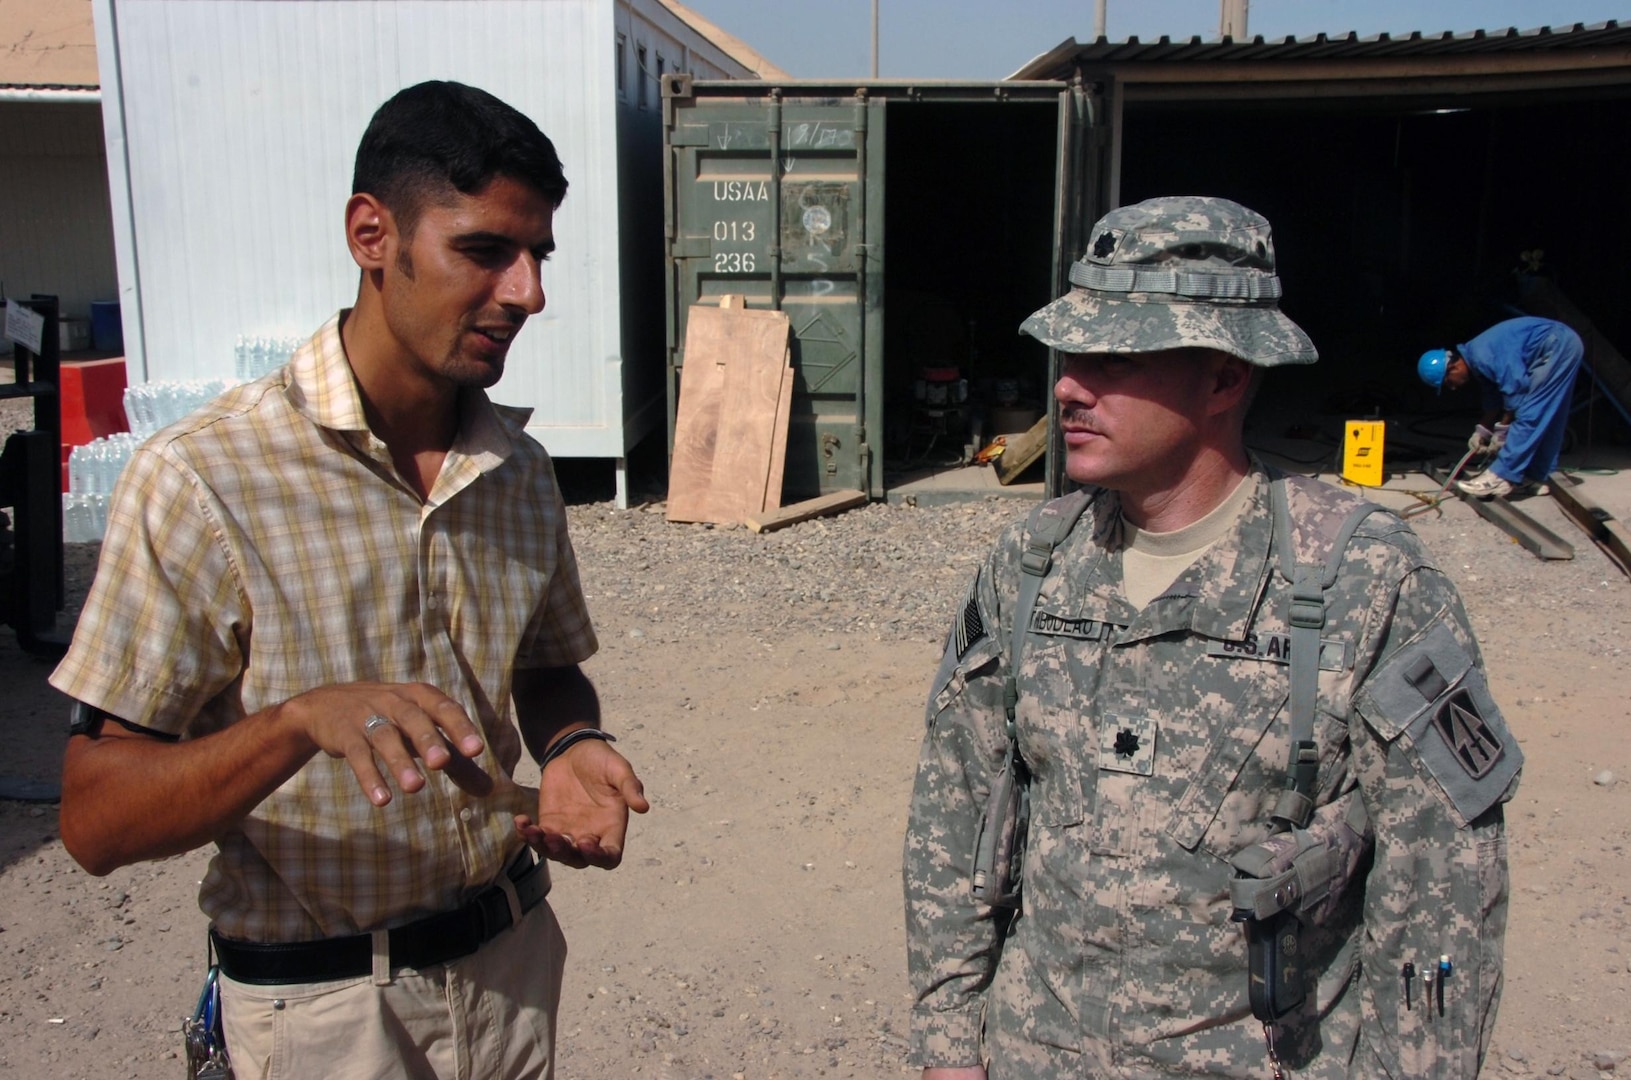 Brigade Combat Team as project manager with the Iraqi-Based Industrial Zone at Joint Base Balad, talks on Oct. 19, 2008, with Hiadel Hassah, project manager for an Iraqi business that refurbishes shipping containers on base. I-BIZ is a designated secure area on a coalition base where a variety of Iraqi businesses can operate, and the Indiana National Guard spearheaded the I-BIZ effort at Joint Base Balad.